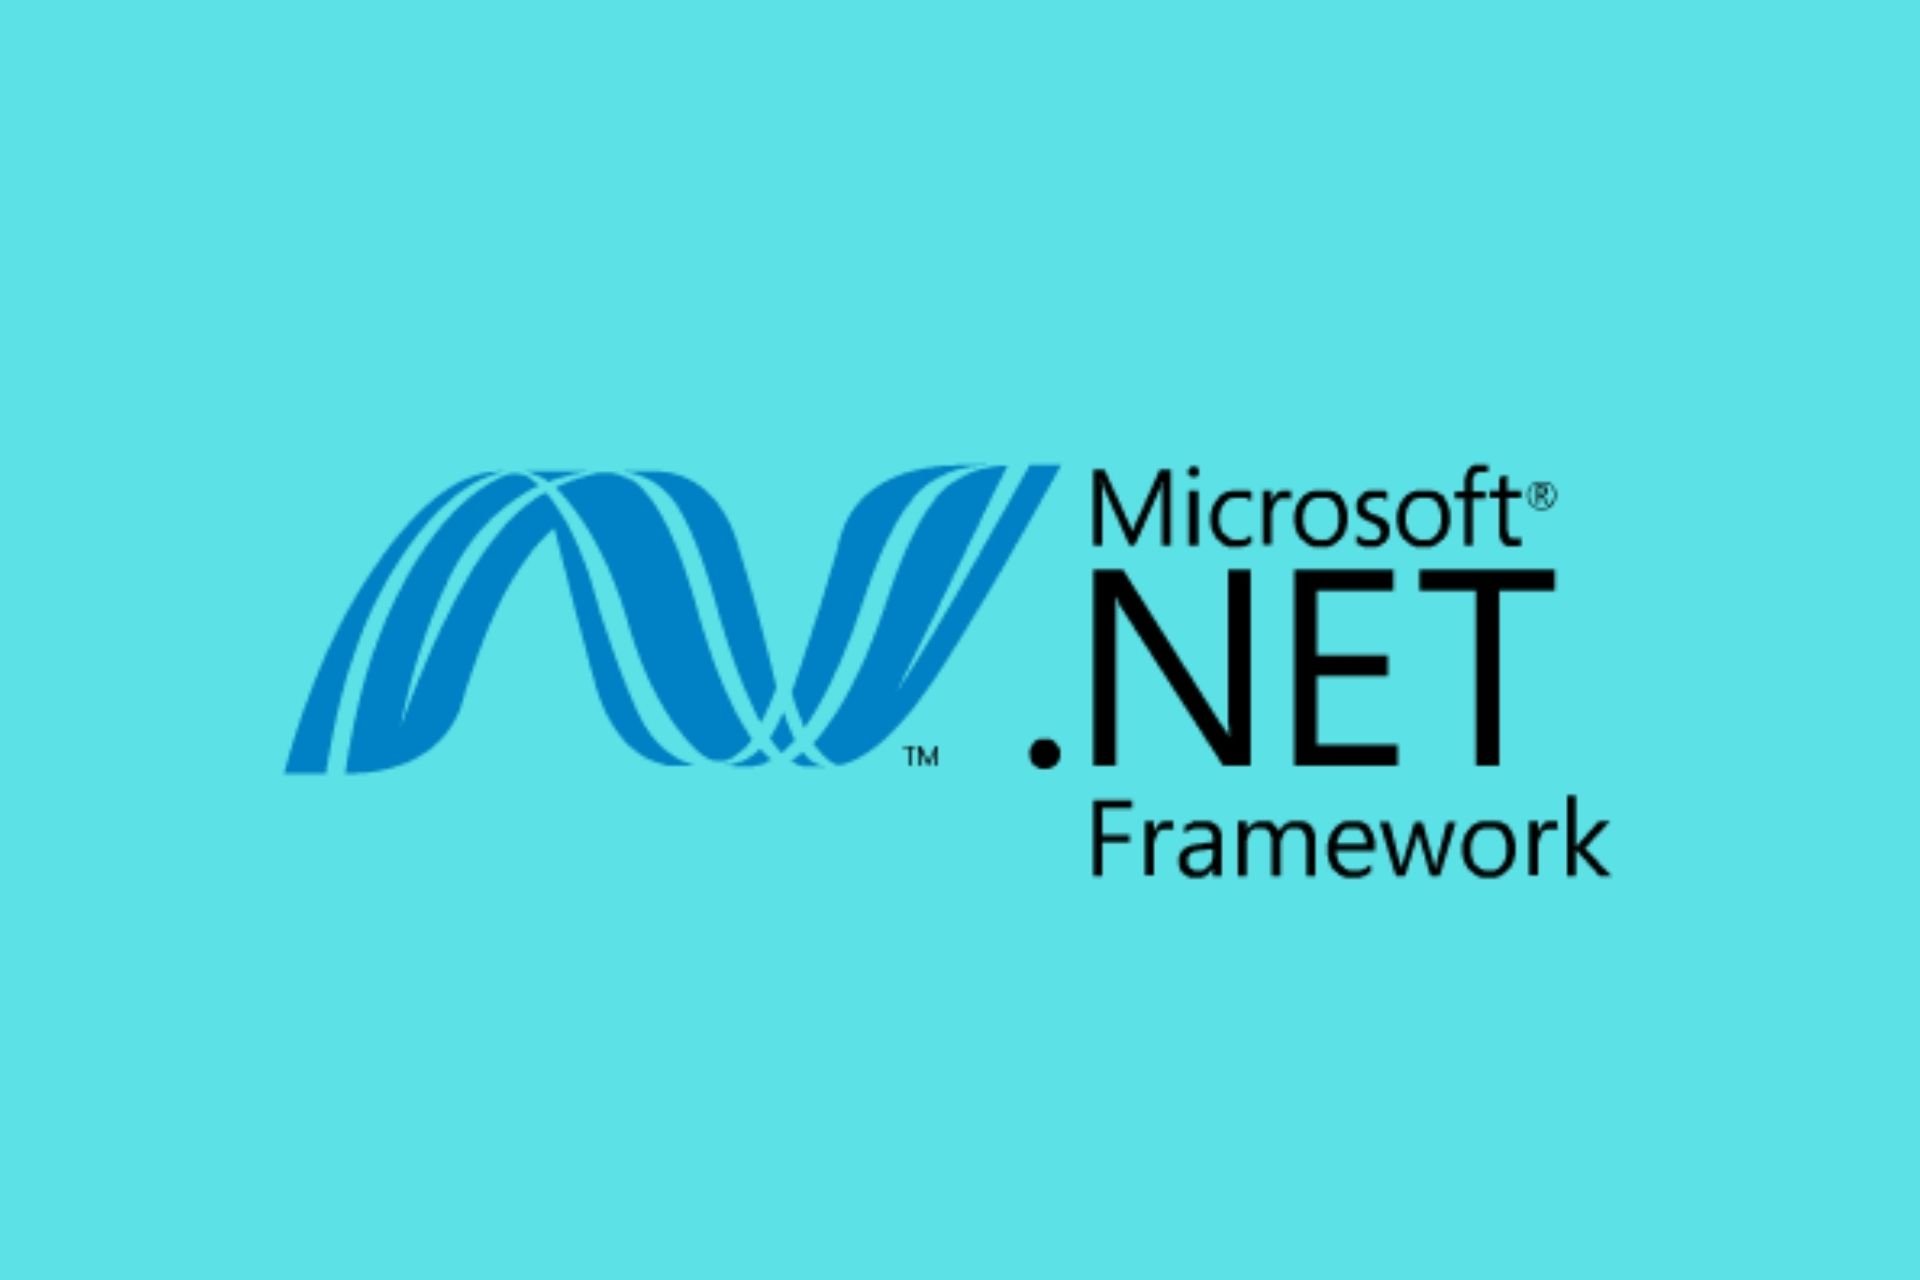 How to download .NET Framework for Windows 10